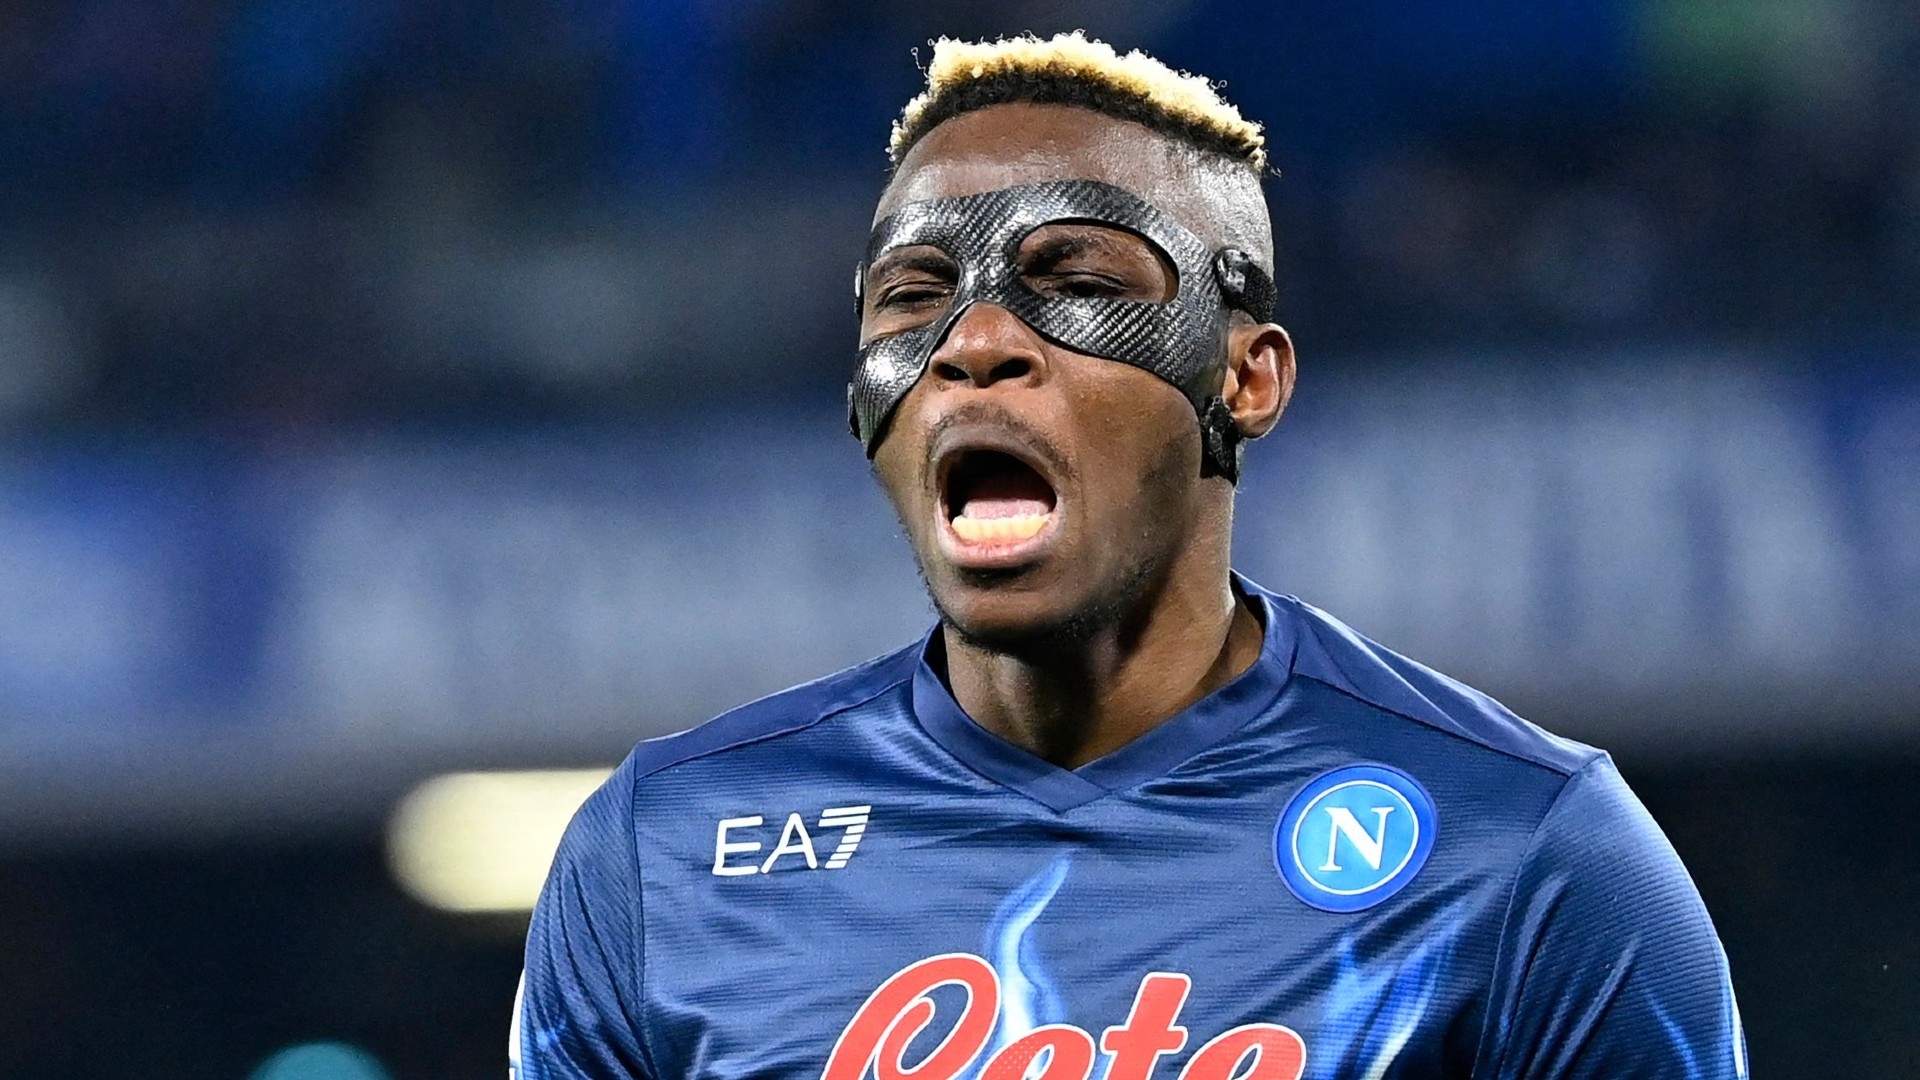  A photo of Victor Osimhen playing for Napoli, wearing a black mask to protect his face.